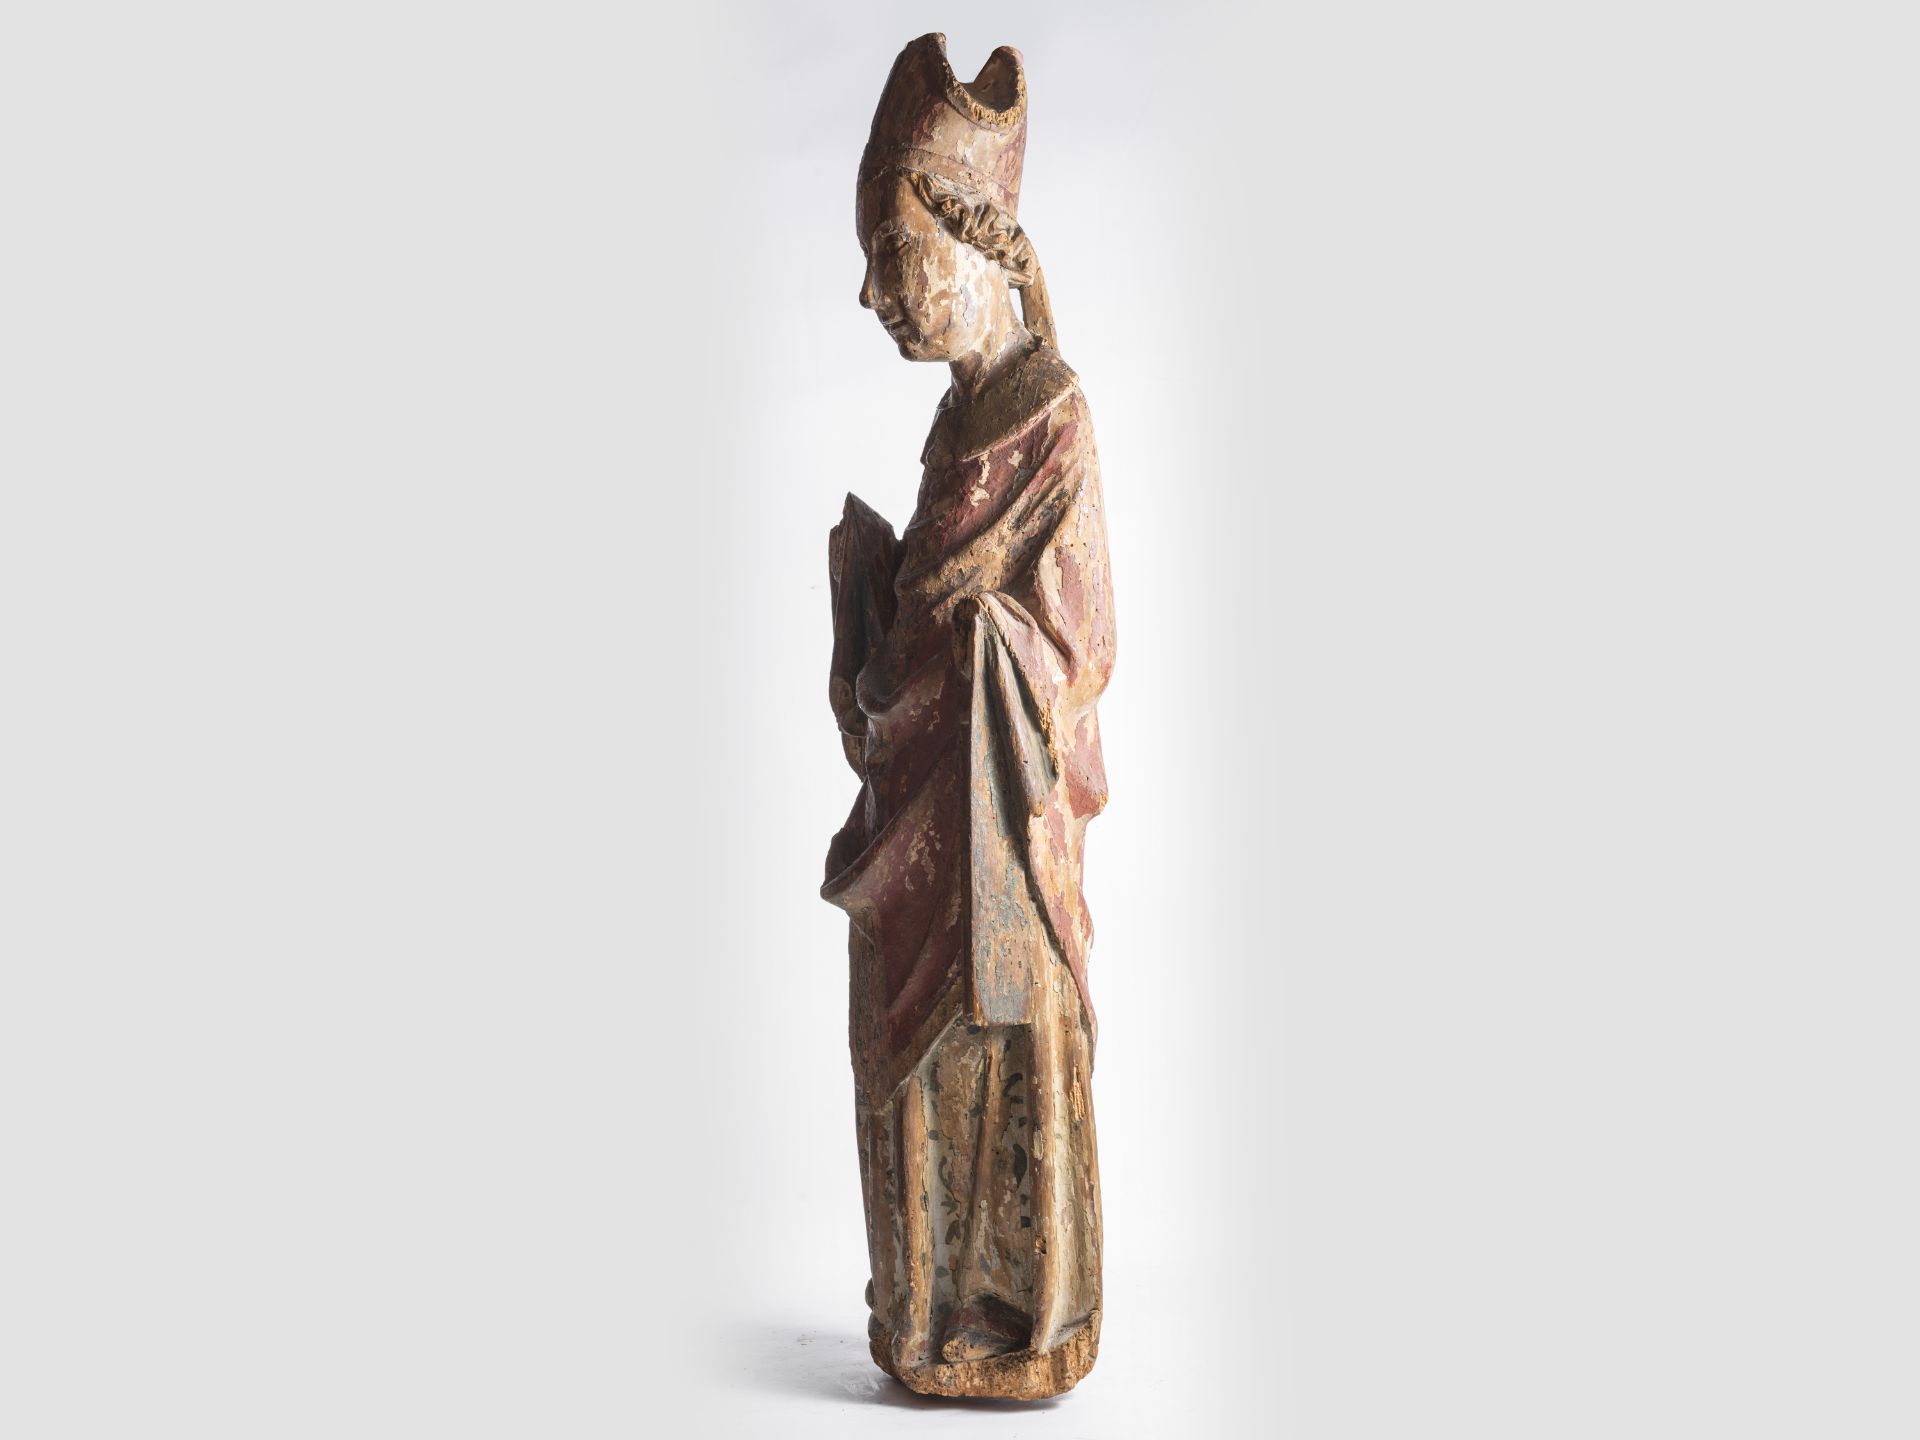 Hl. Bishop in Soft Style, Tyrol around 1400, Carved lime wood - Image 5 of 7